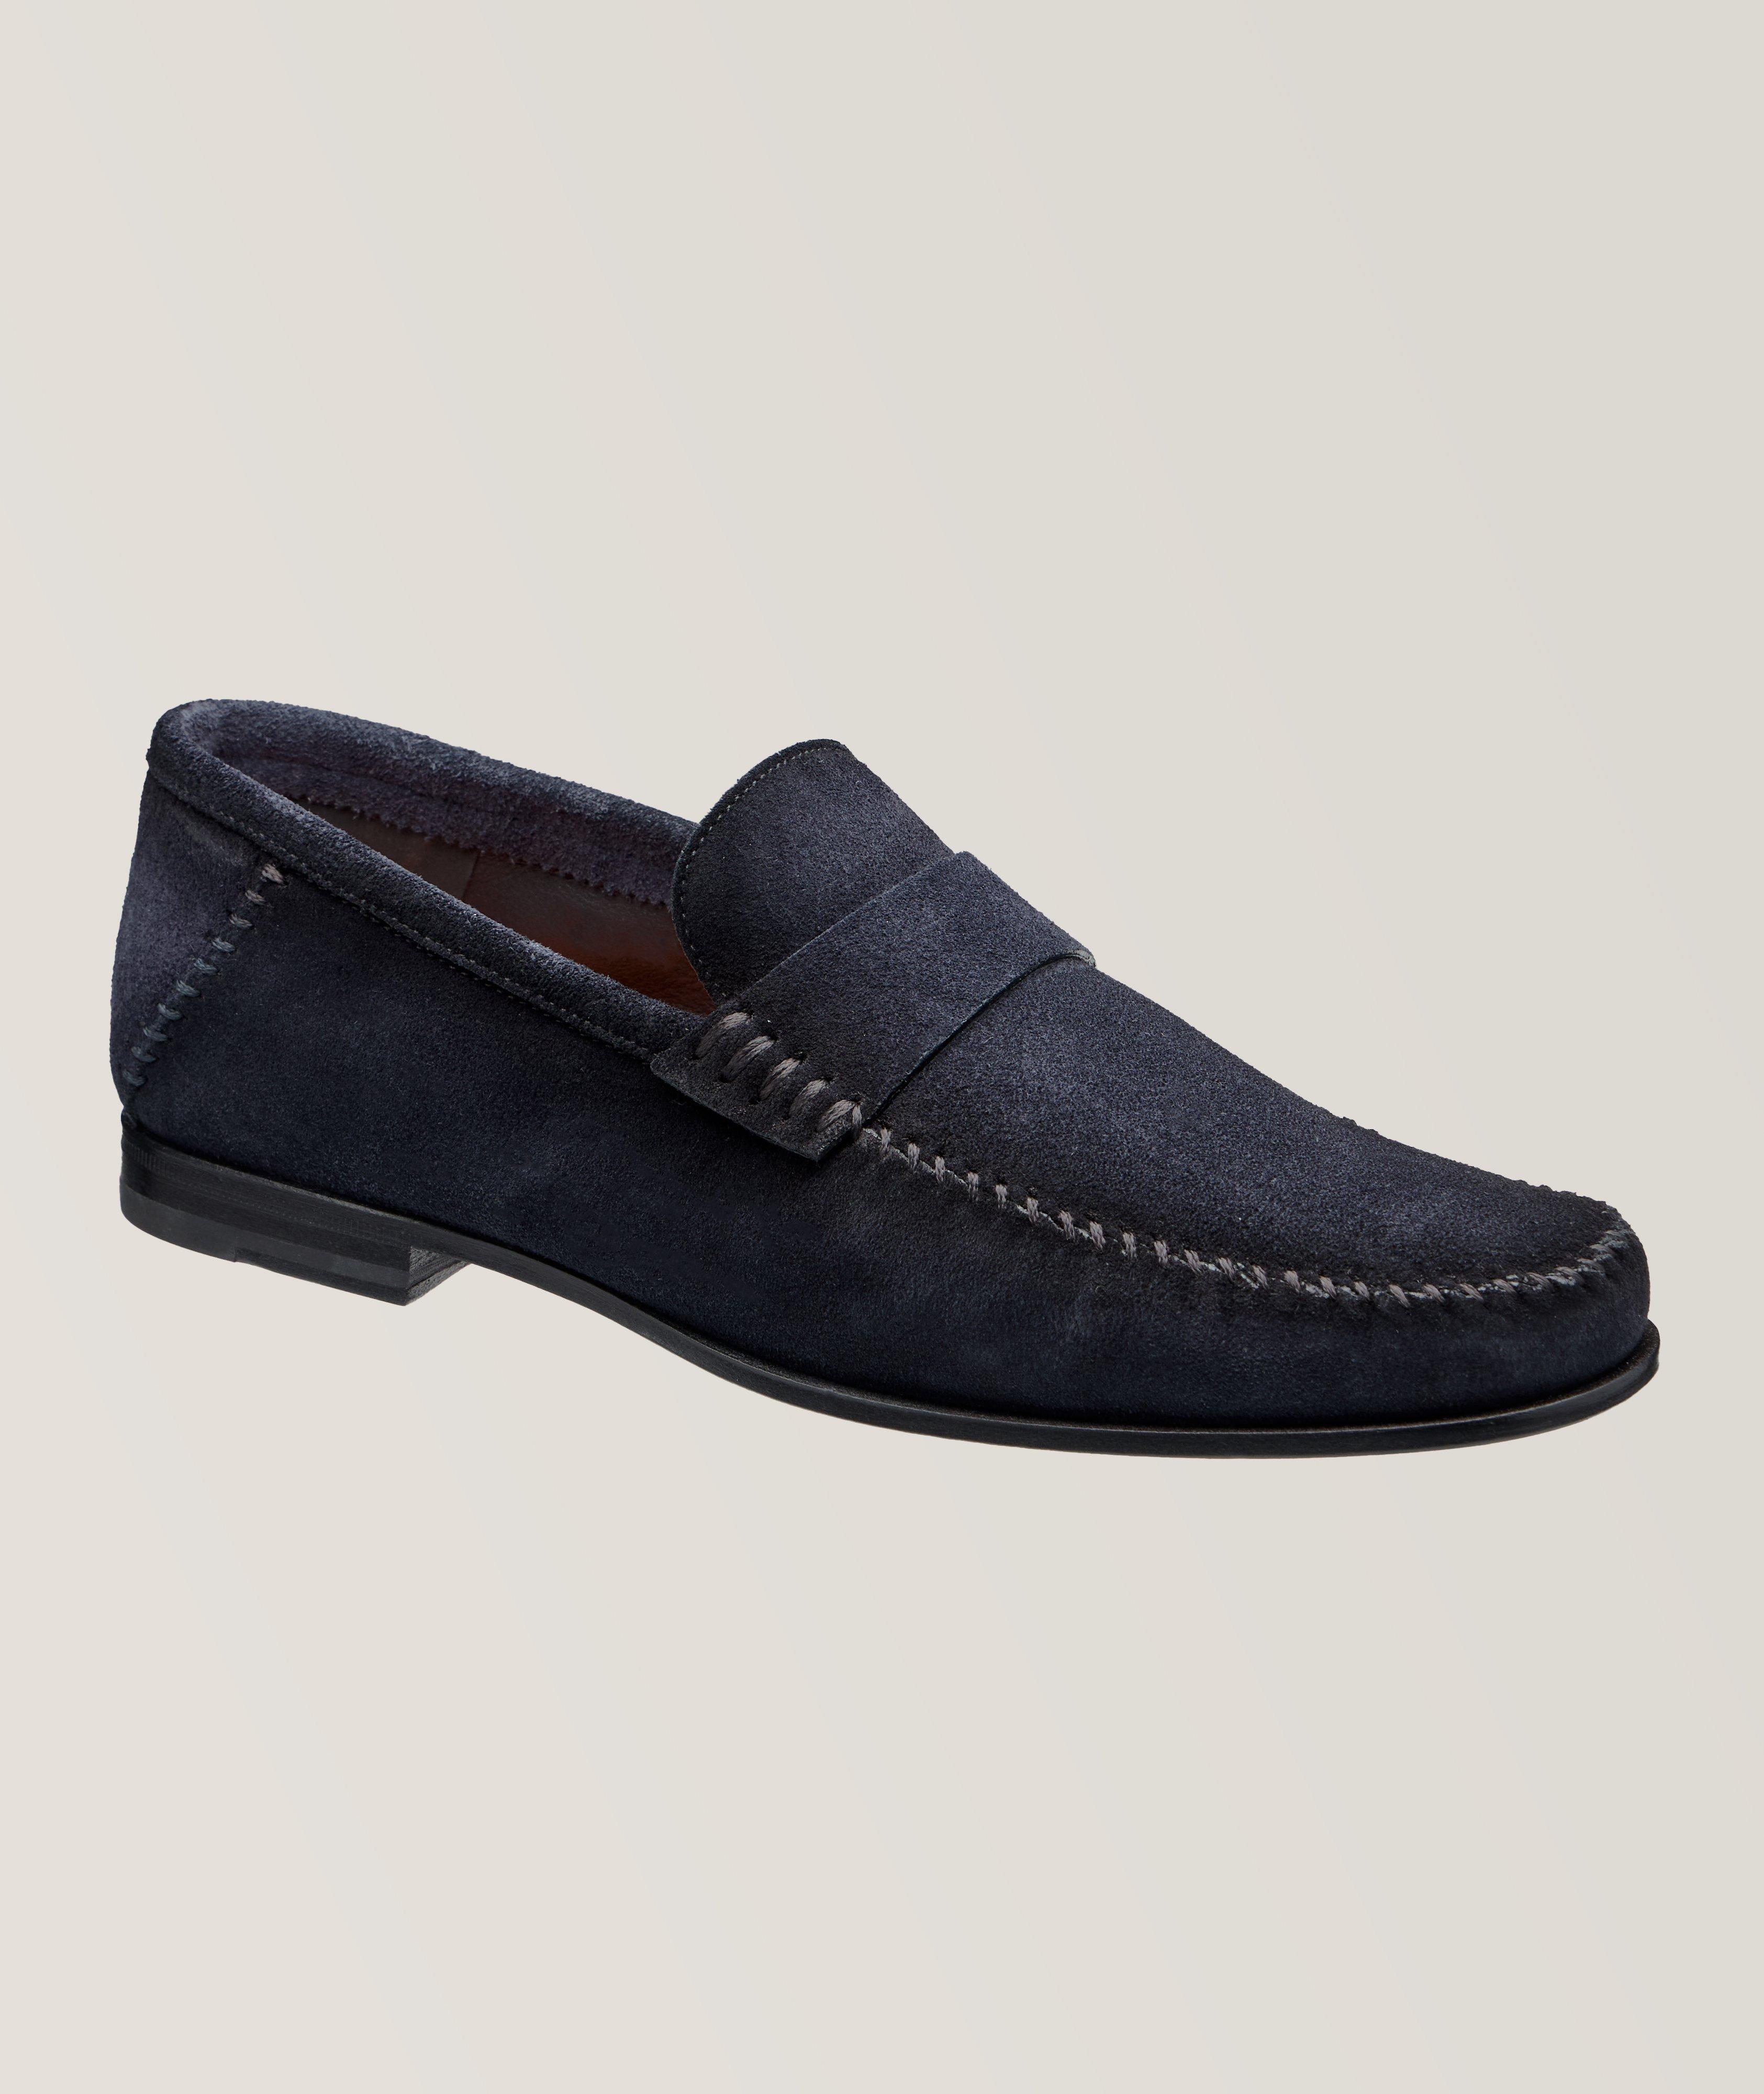 Paine Suede Leather Banded Loafers image 0